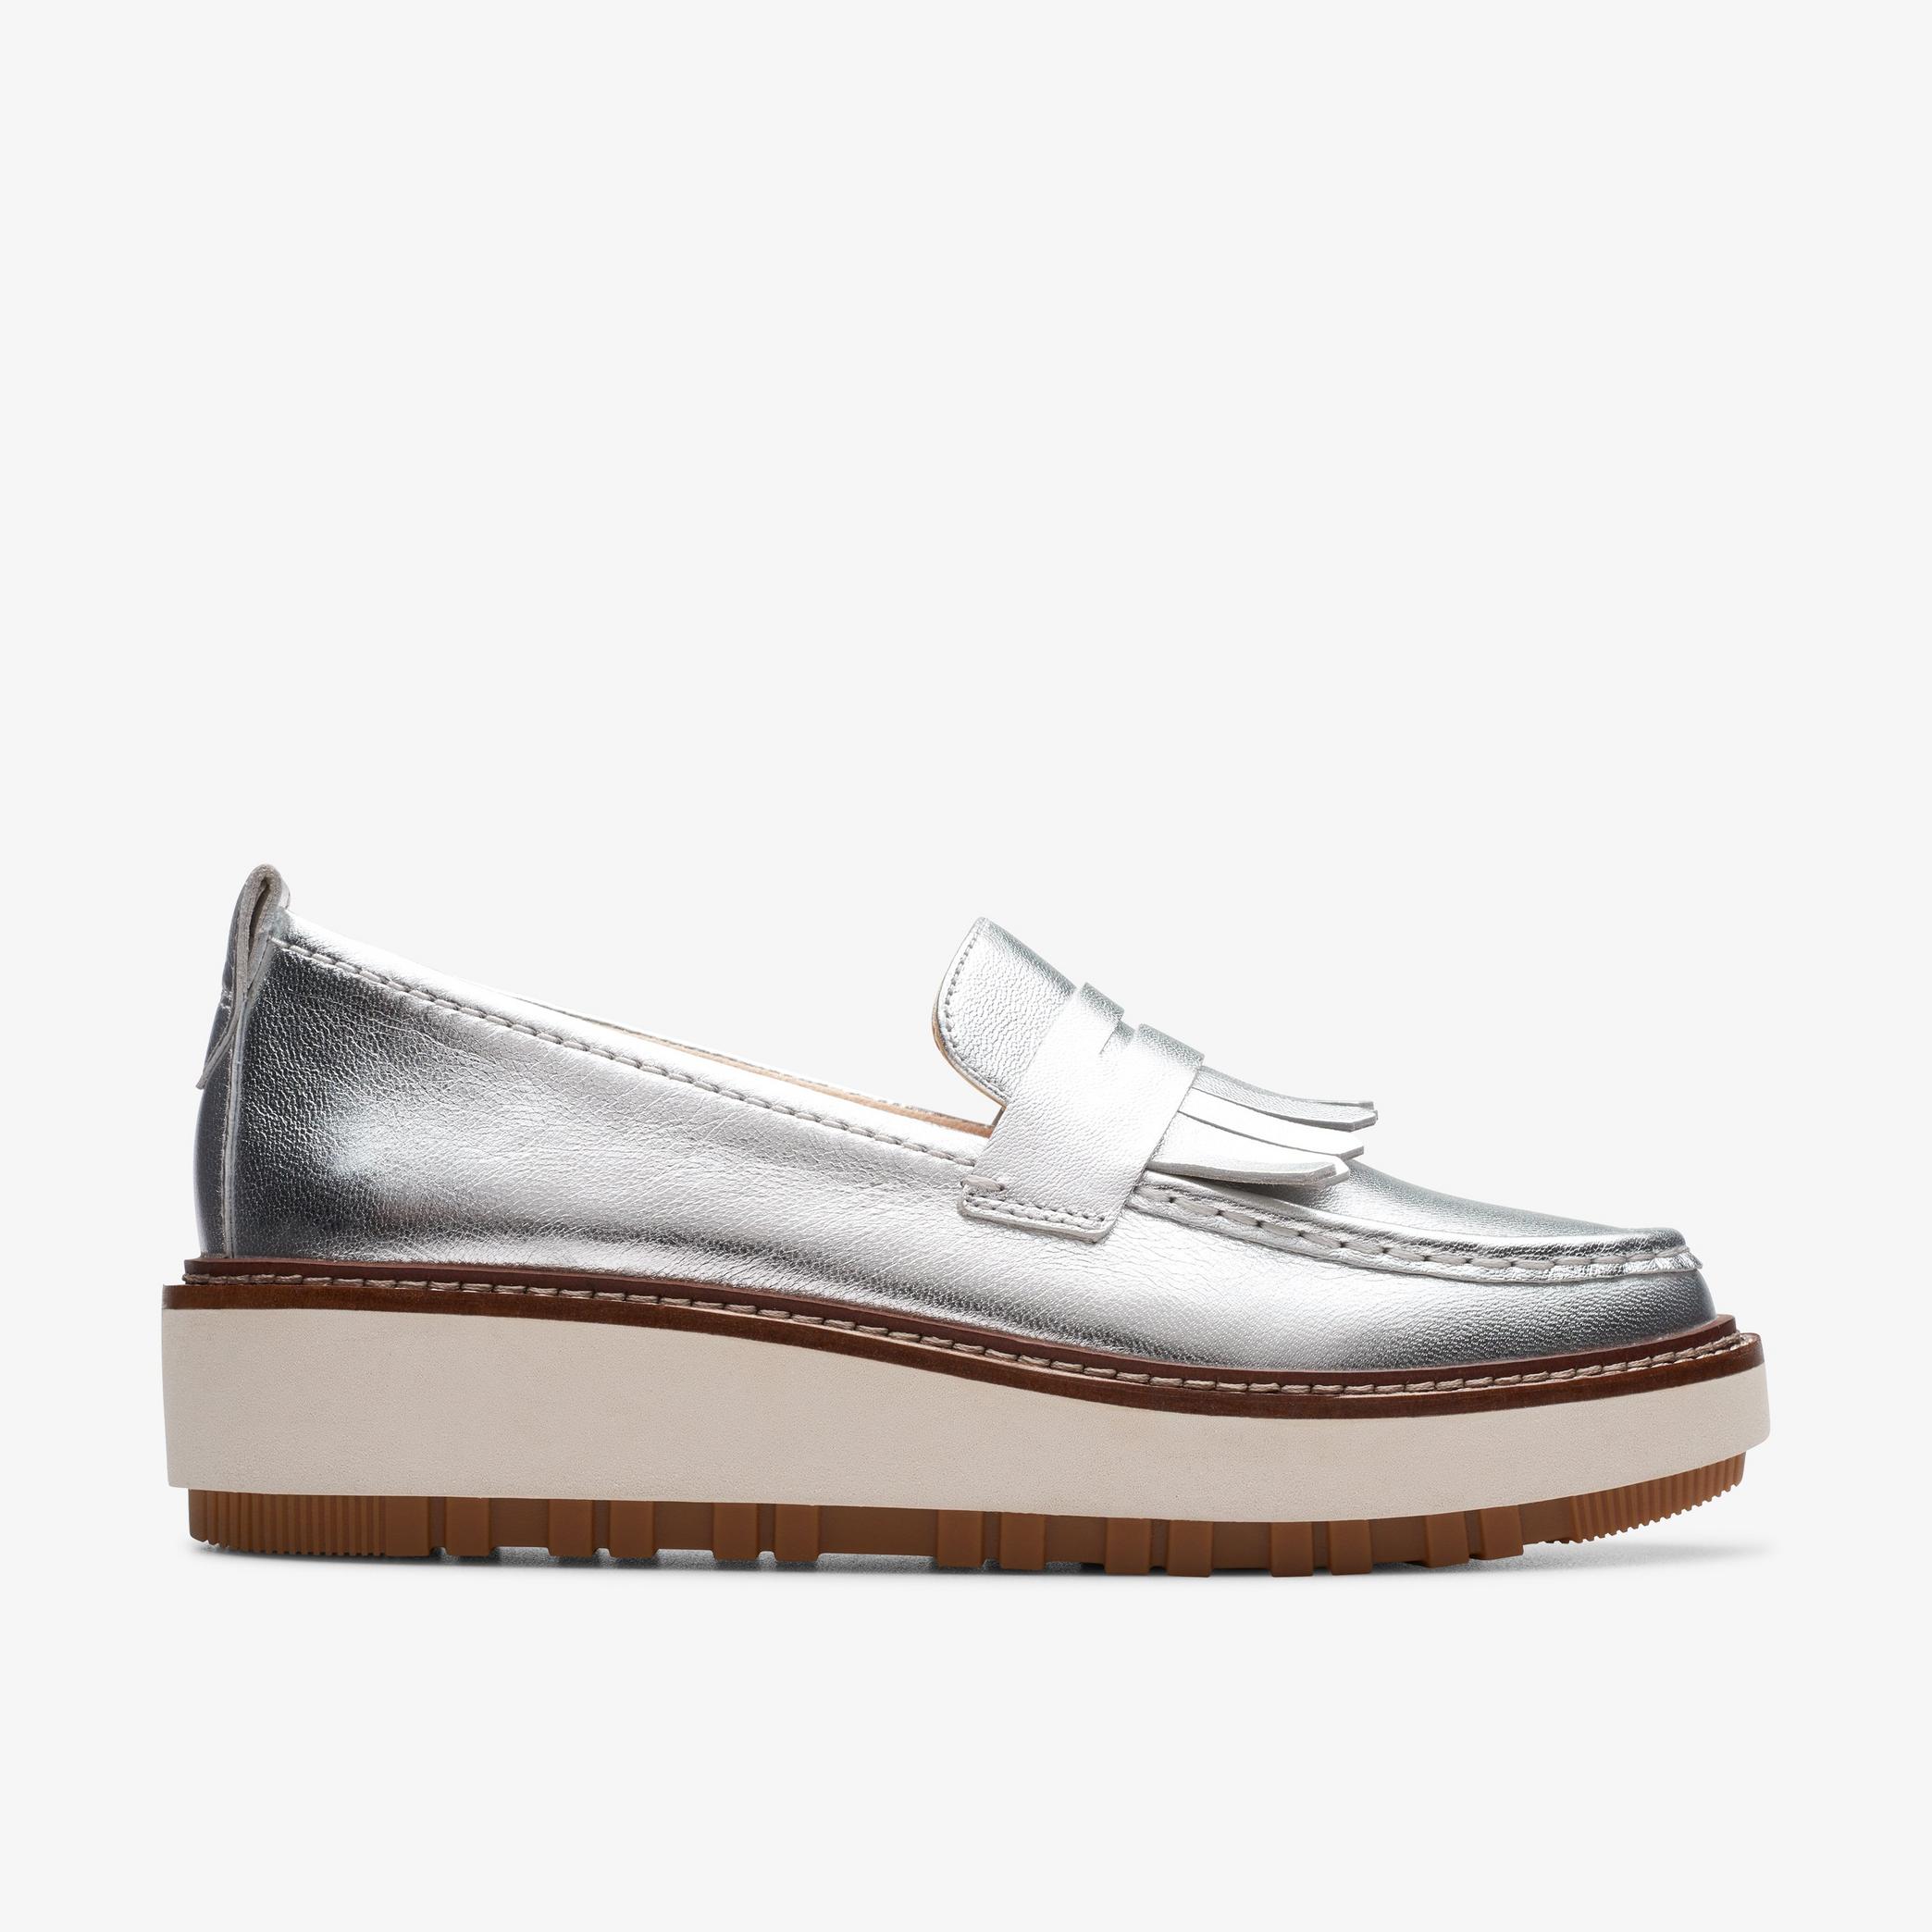 Orianna Loafer Silver Metallic Loafers, view 1 of 6